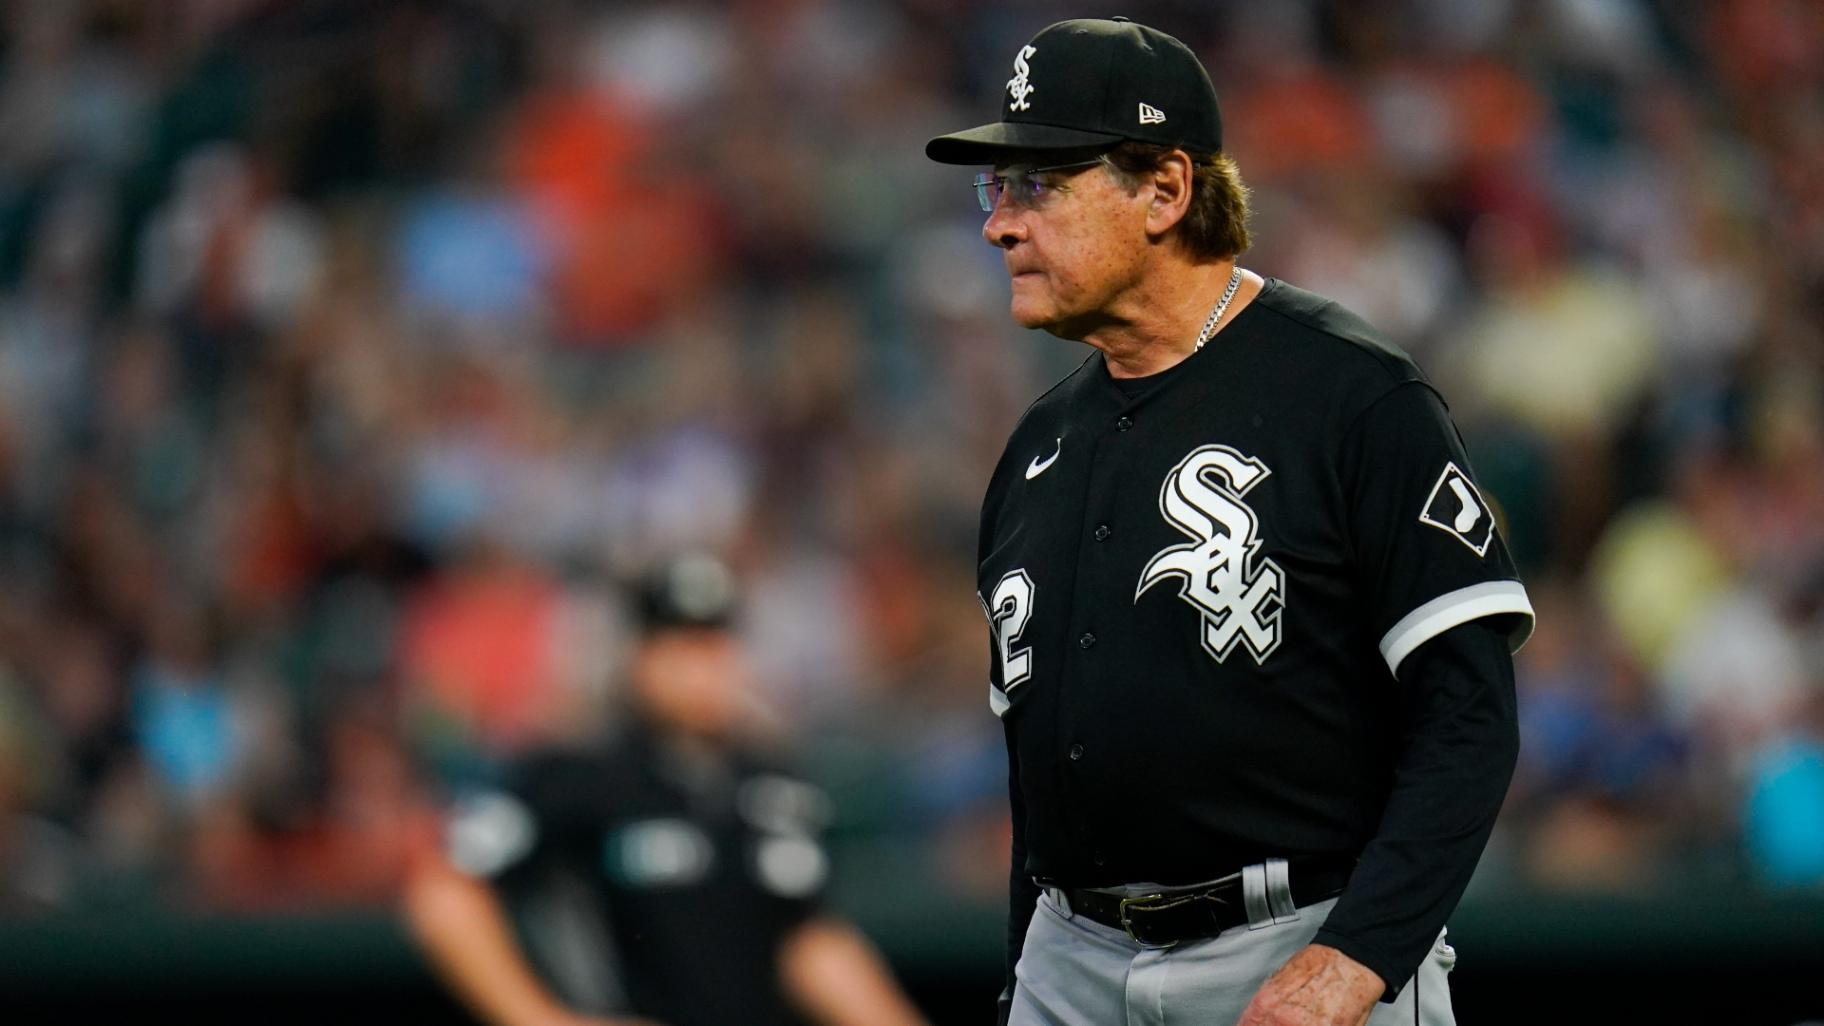 White Sox Manager Tony La Russa Out Indefinitely with Health Issue, Chicago News